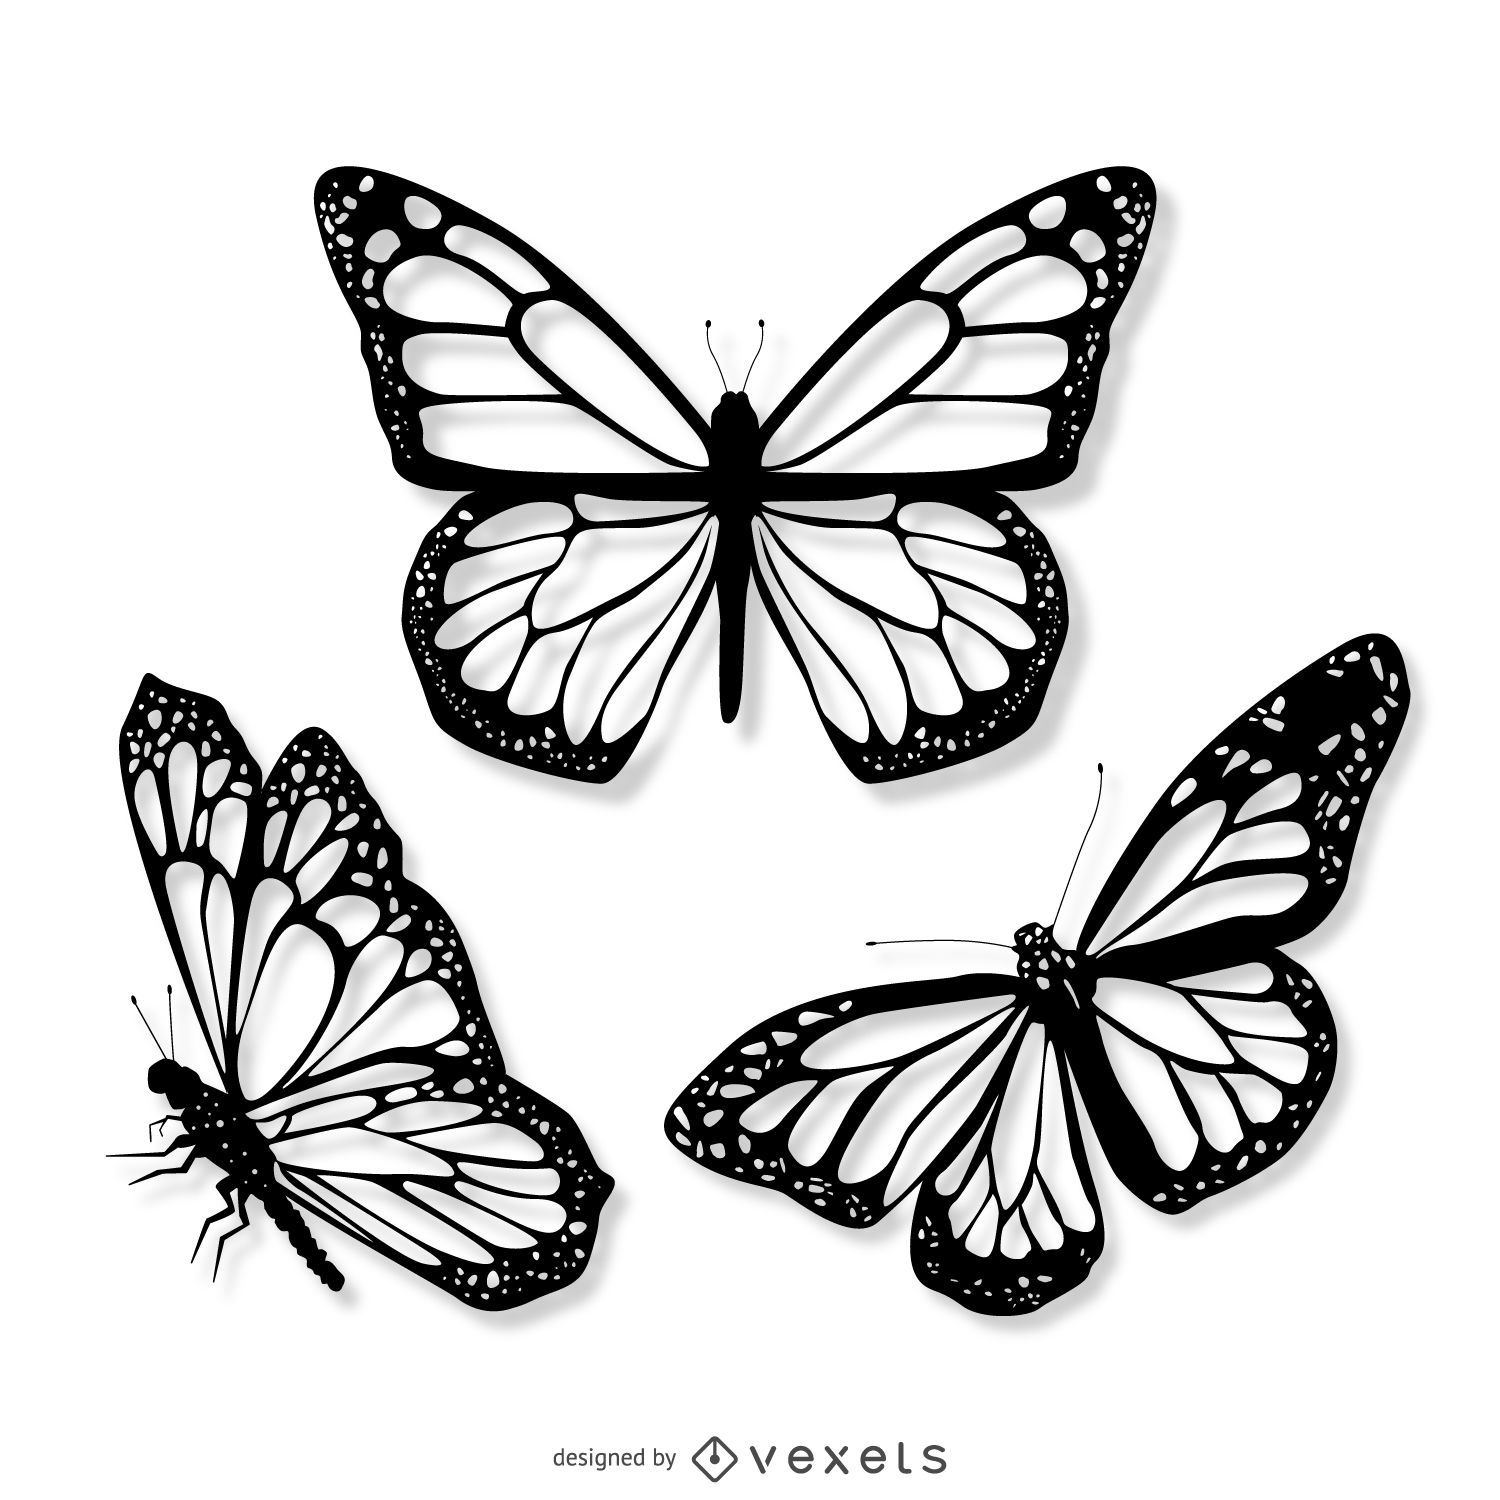 Download 3 Realistic Butterfly Illustration Set - Vector Download